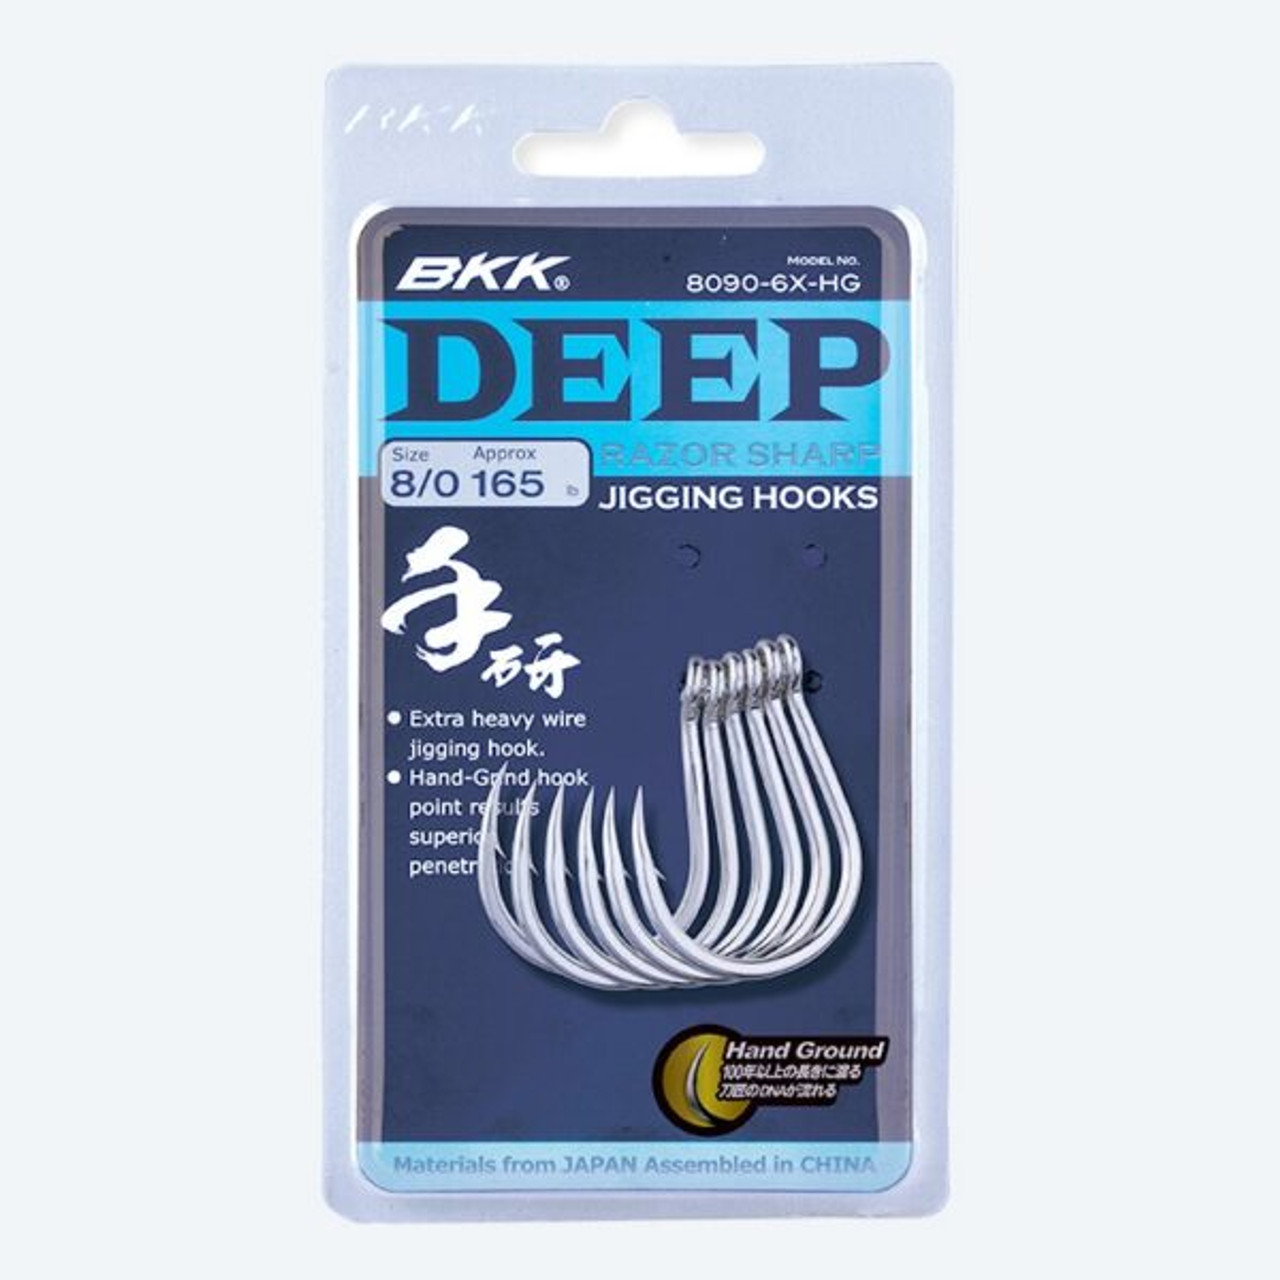  BKK SF DEEP Long Assist Hook, 8/0, 3-Pack, 6X, Saltwater  Bright Tin Coating, Hand Ground Point